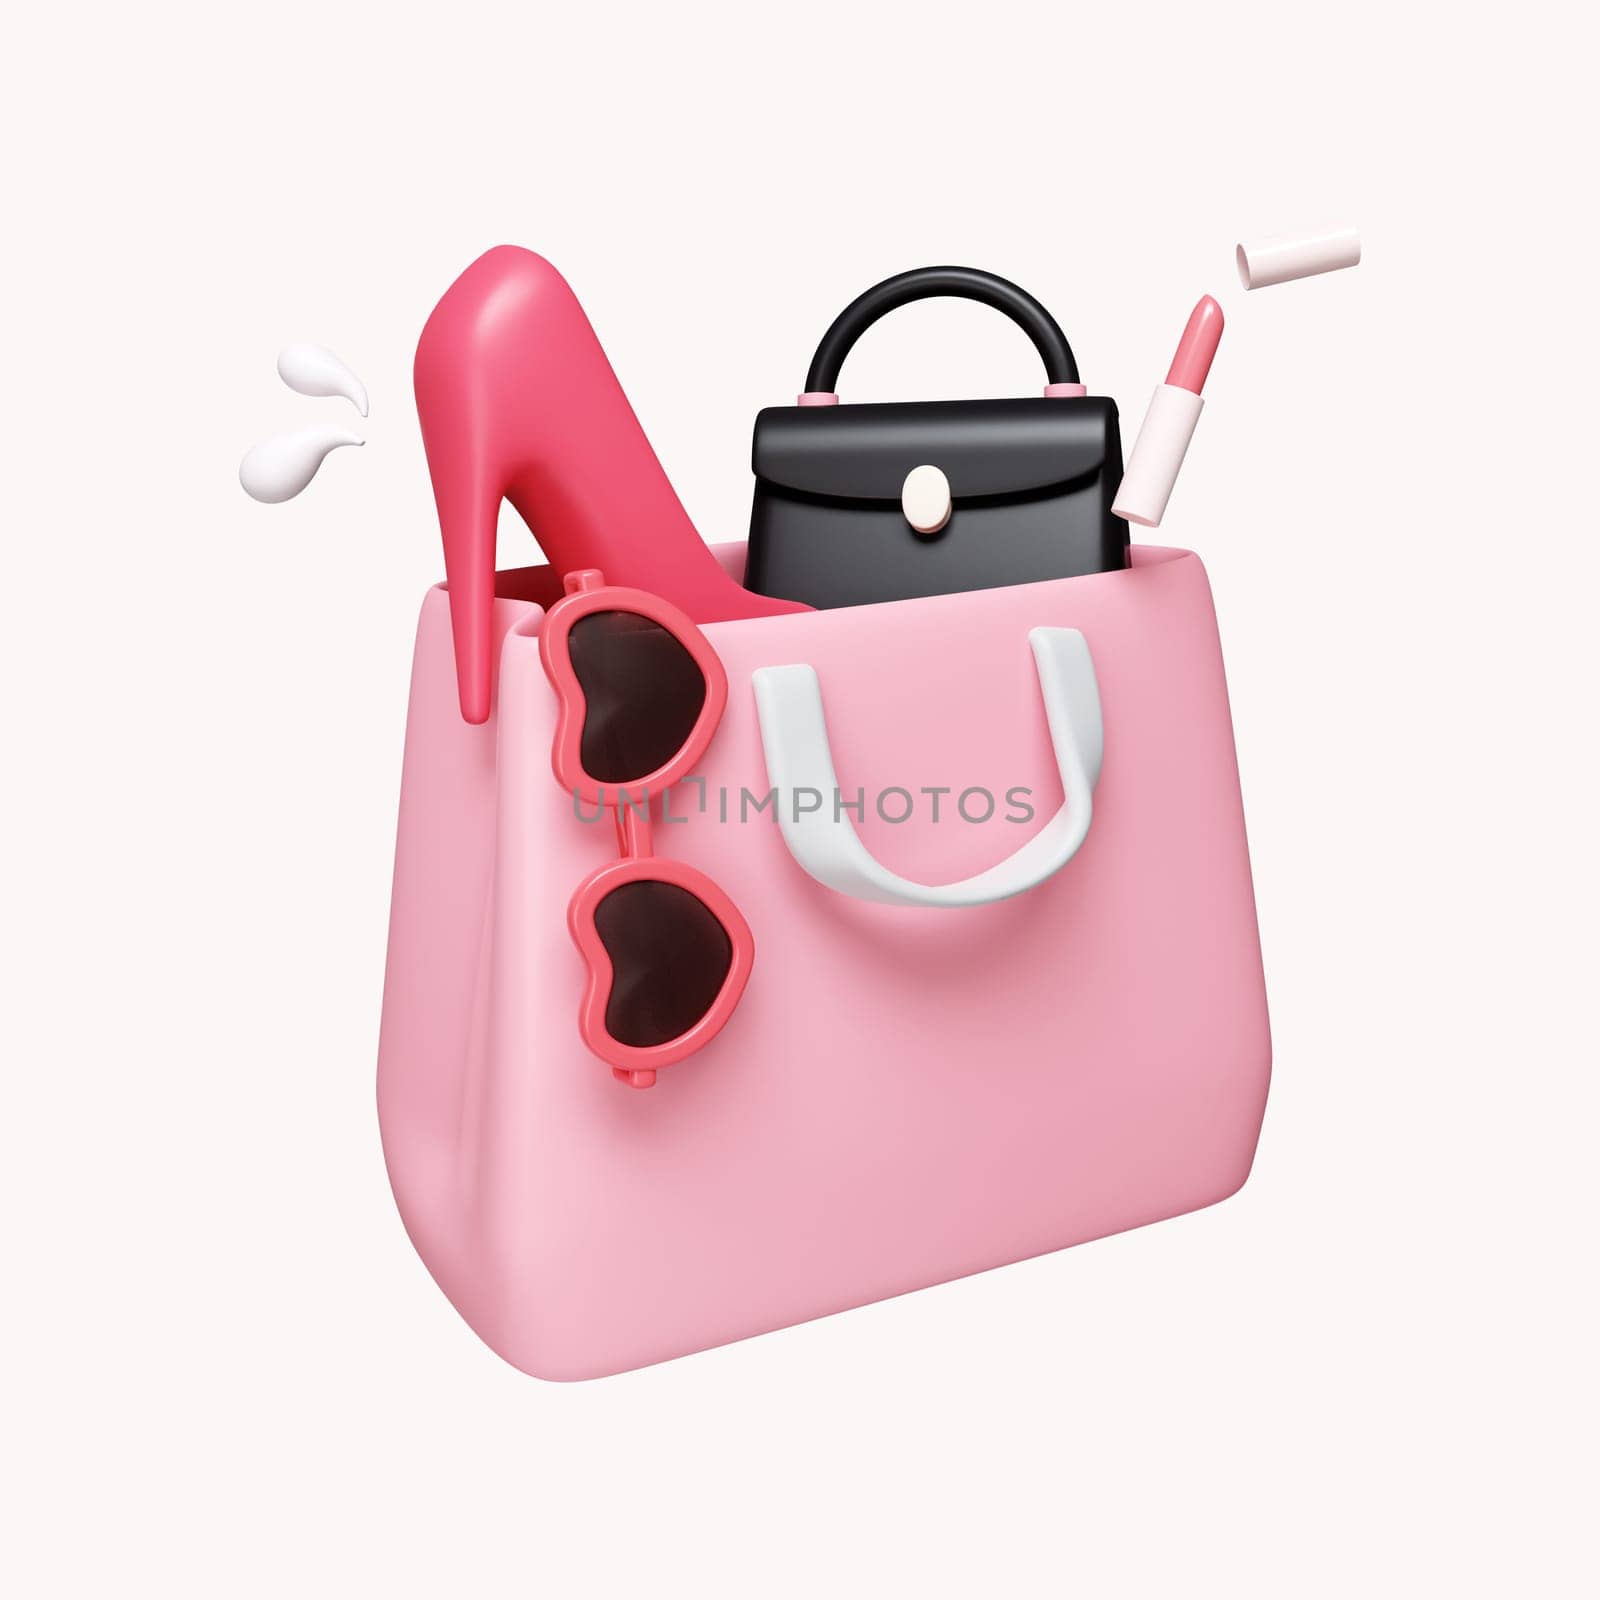 3d shopping bag with high heels, cosmetics, sun glasses and hand bag. shopping online concept. icon isolated on white background. 3d rendering illustration. Clipping path. by meepiangraphic